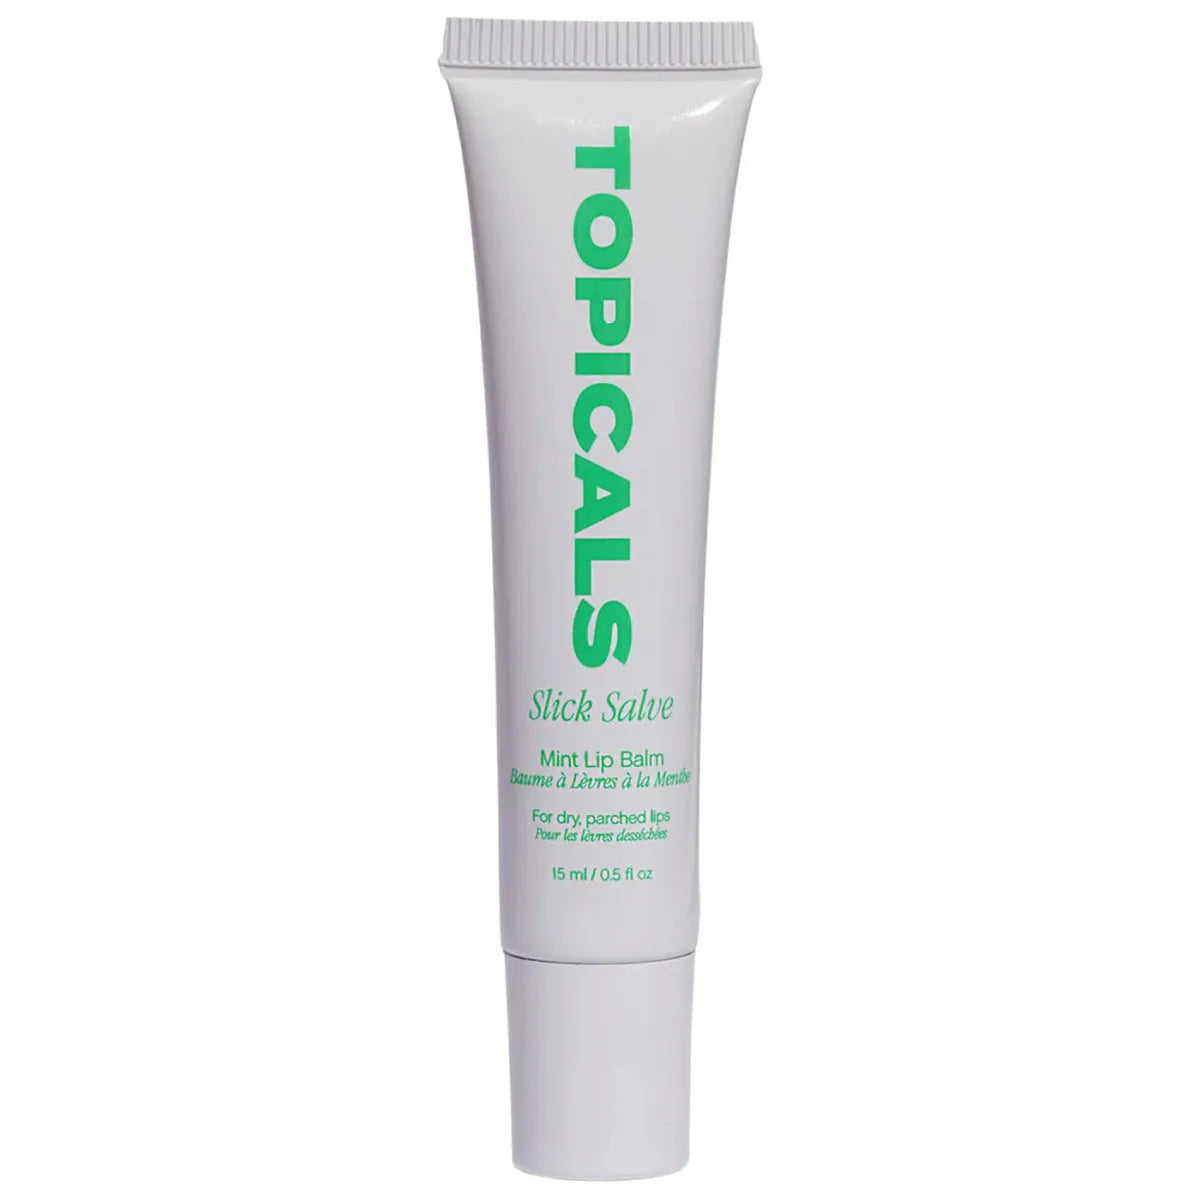 Topicals Slick Salve Glossy Lip Balm for Soothing + Hydration, 15ml - Glam Global UK